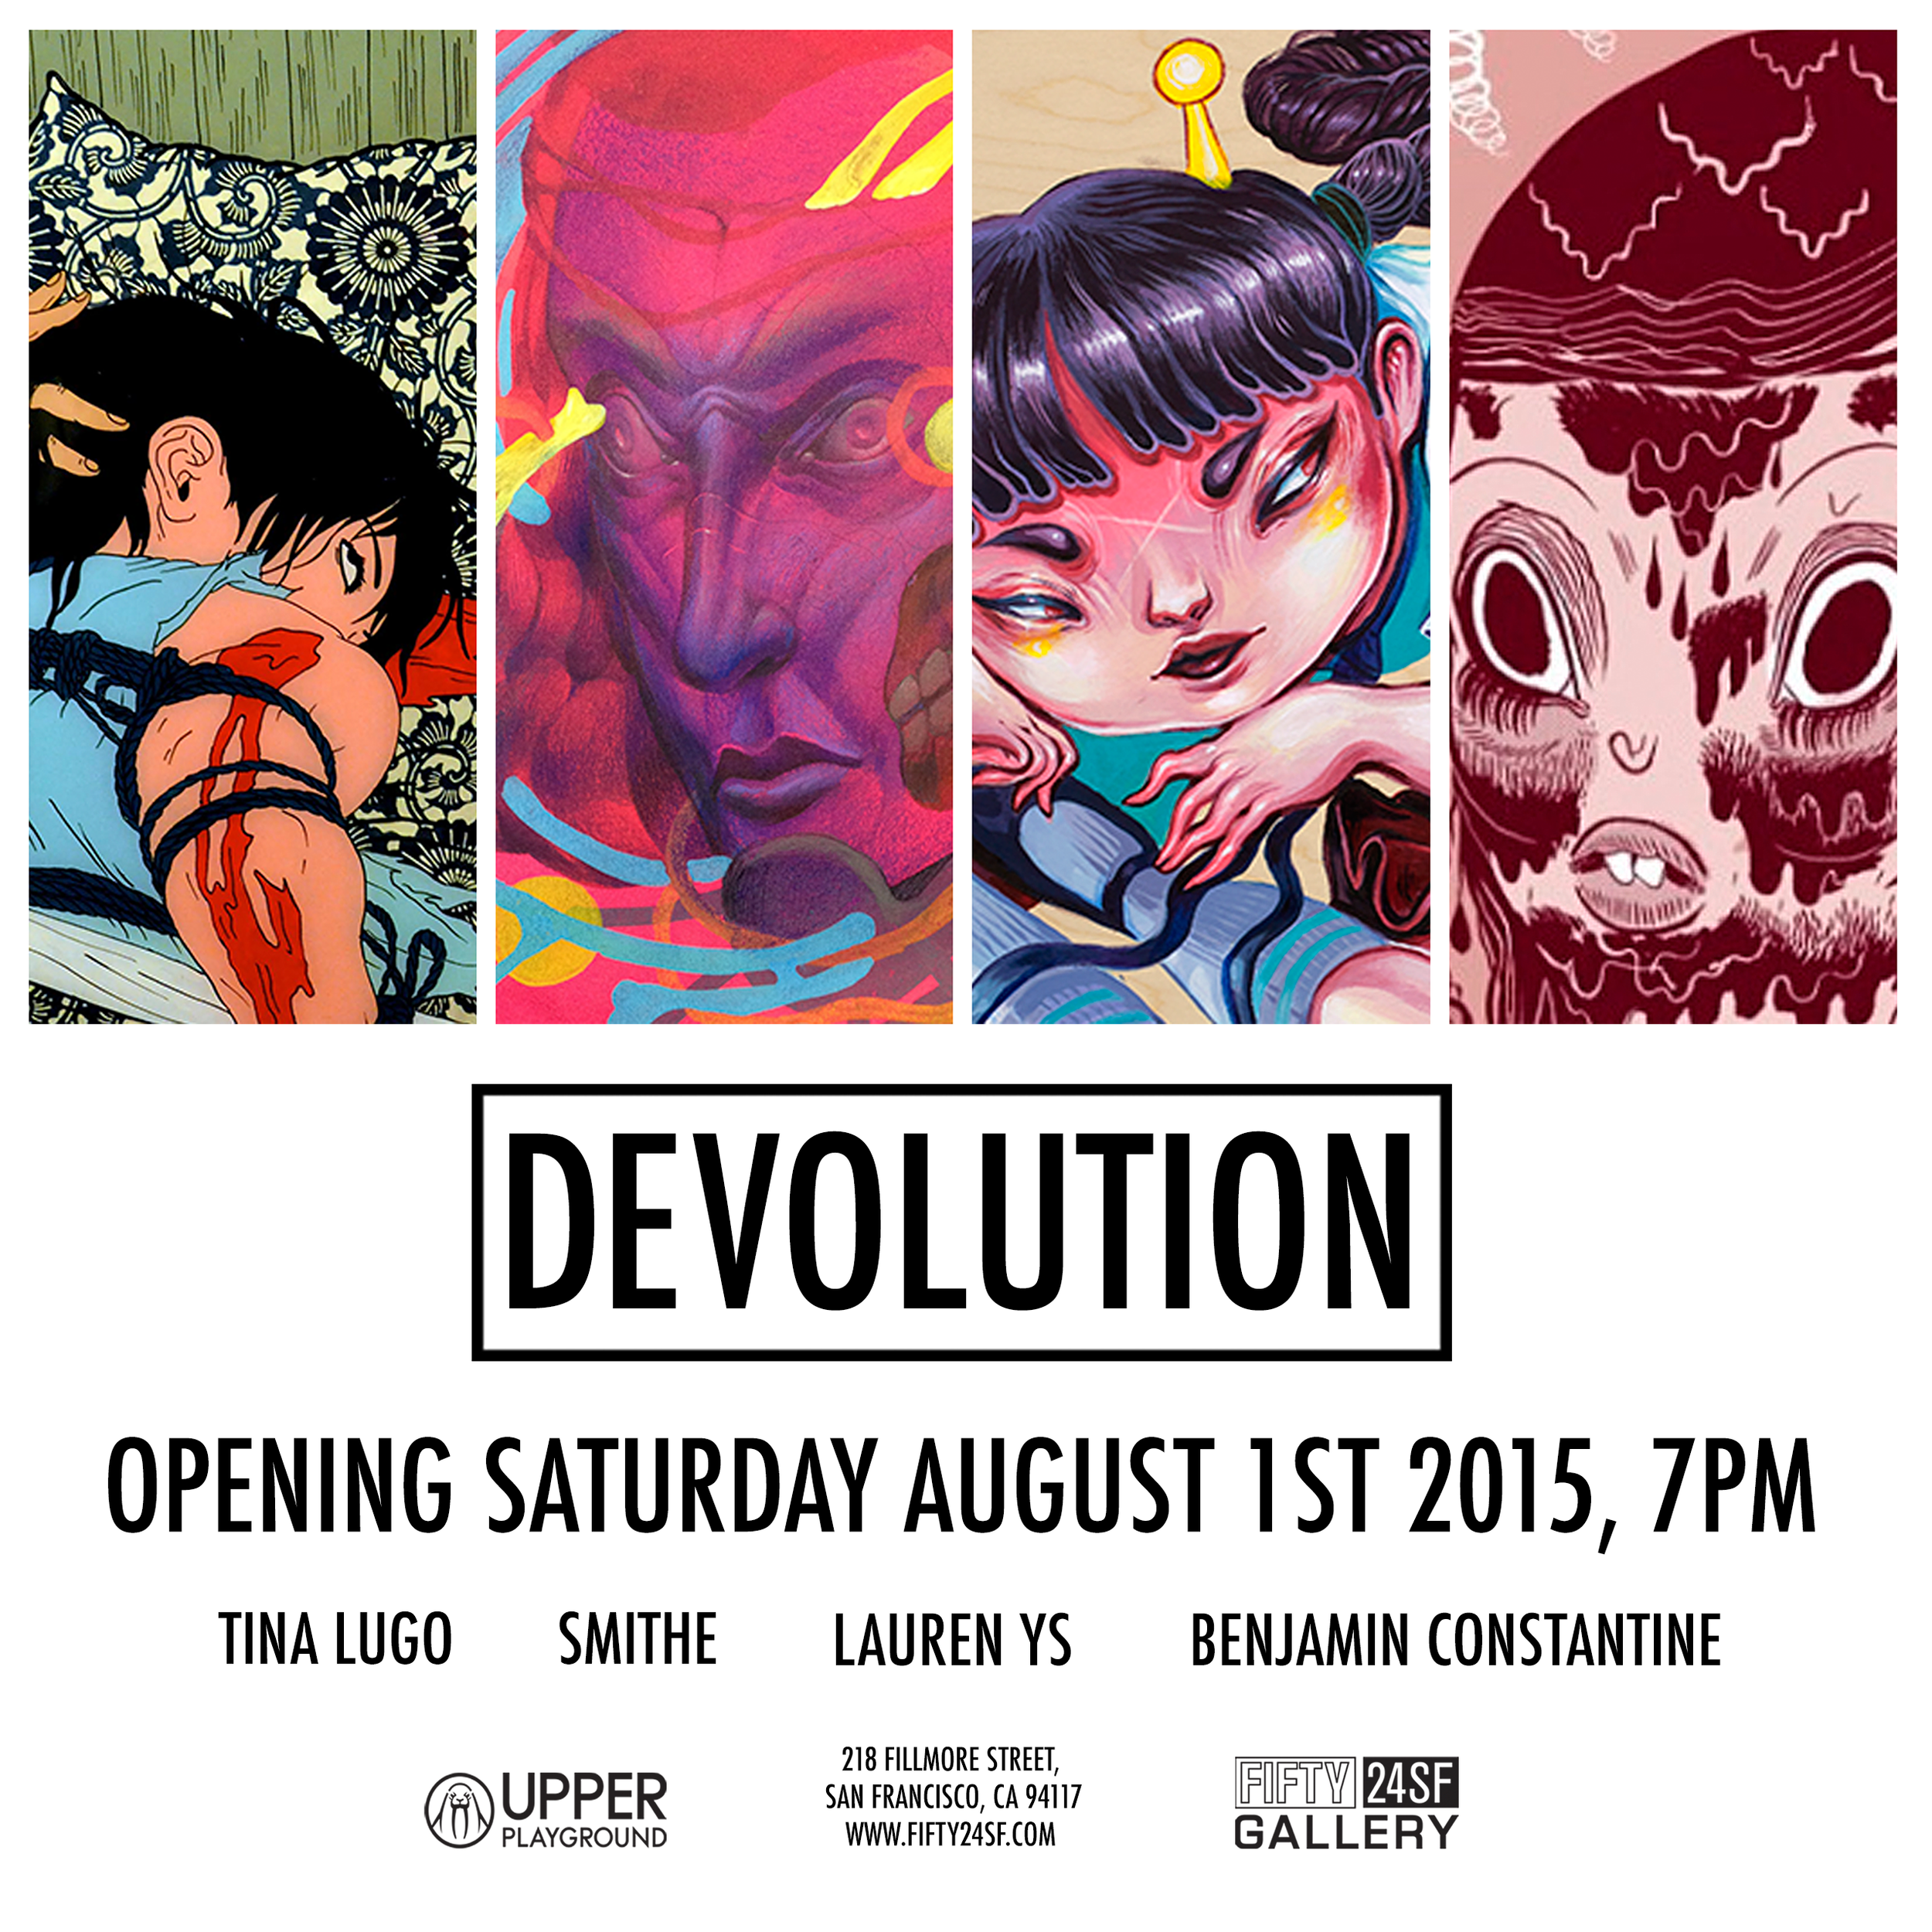 devolution-exhibition-fifty24sf-gallery-001.png